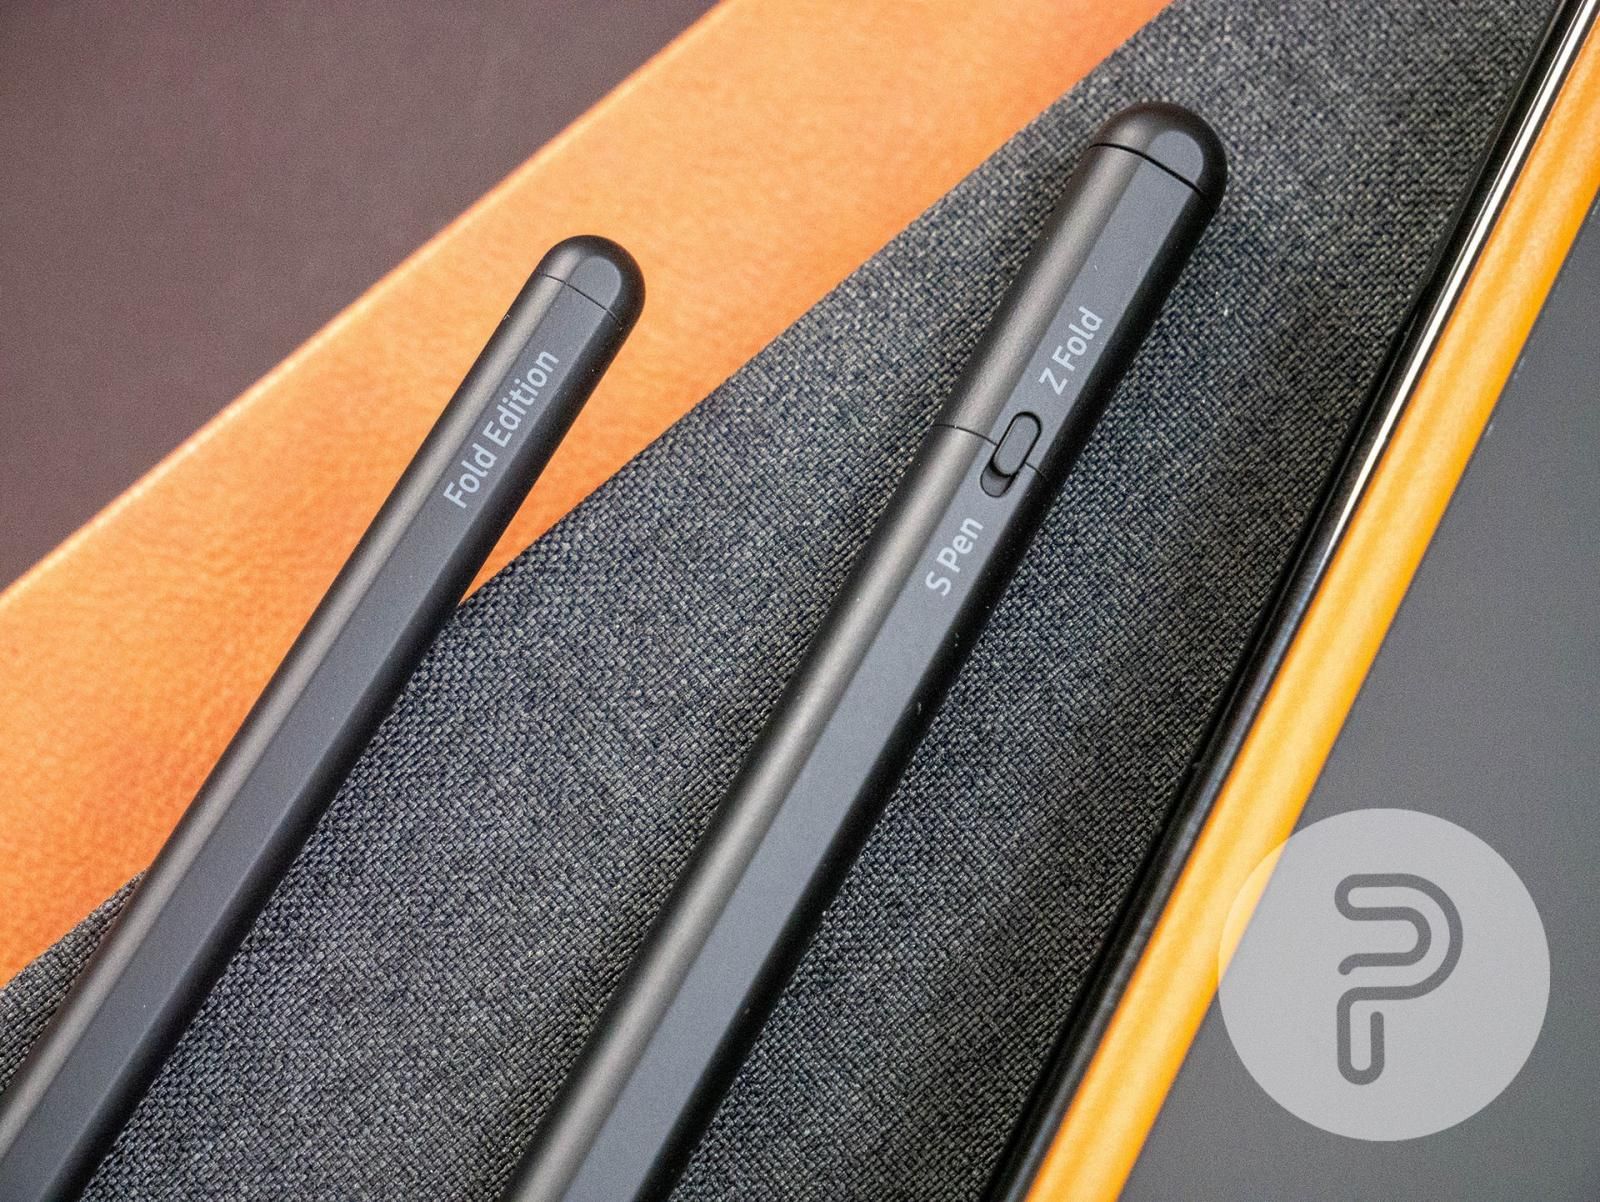 Samsung Galaxy S Pen Pro and S Pen Fold Edition